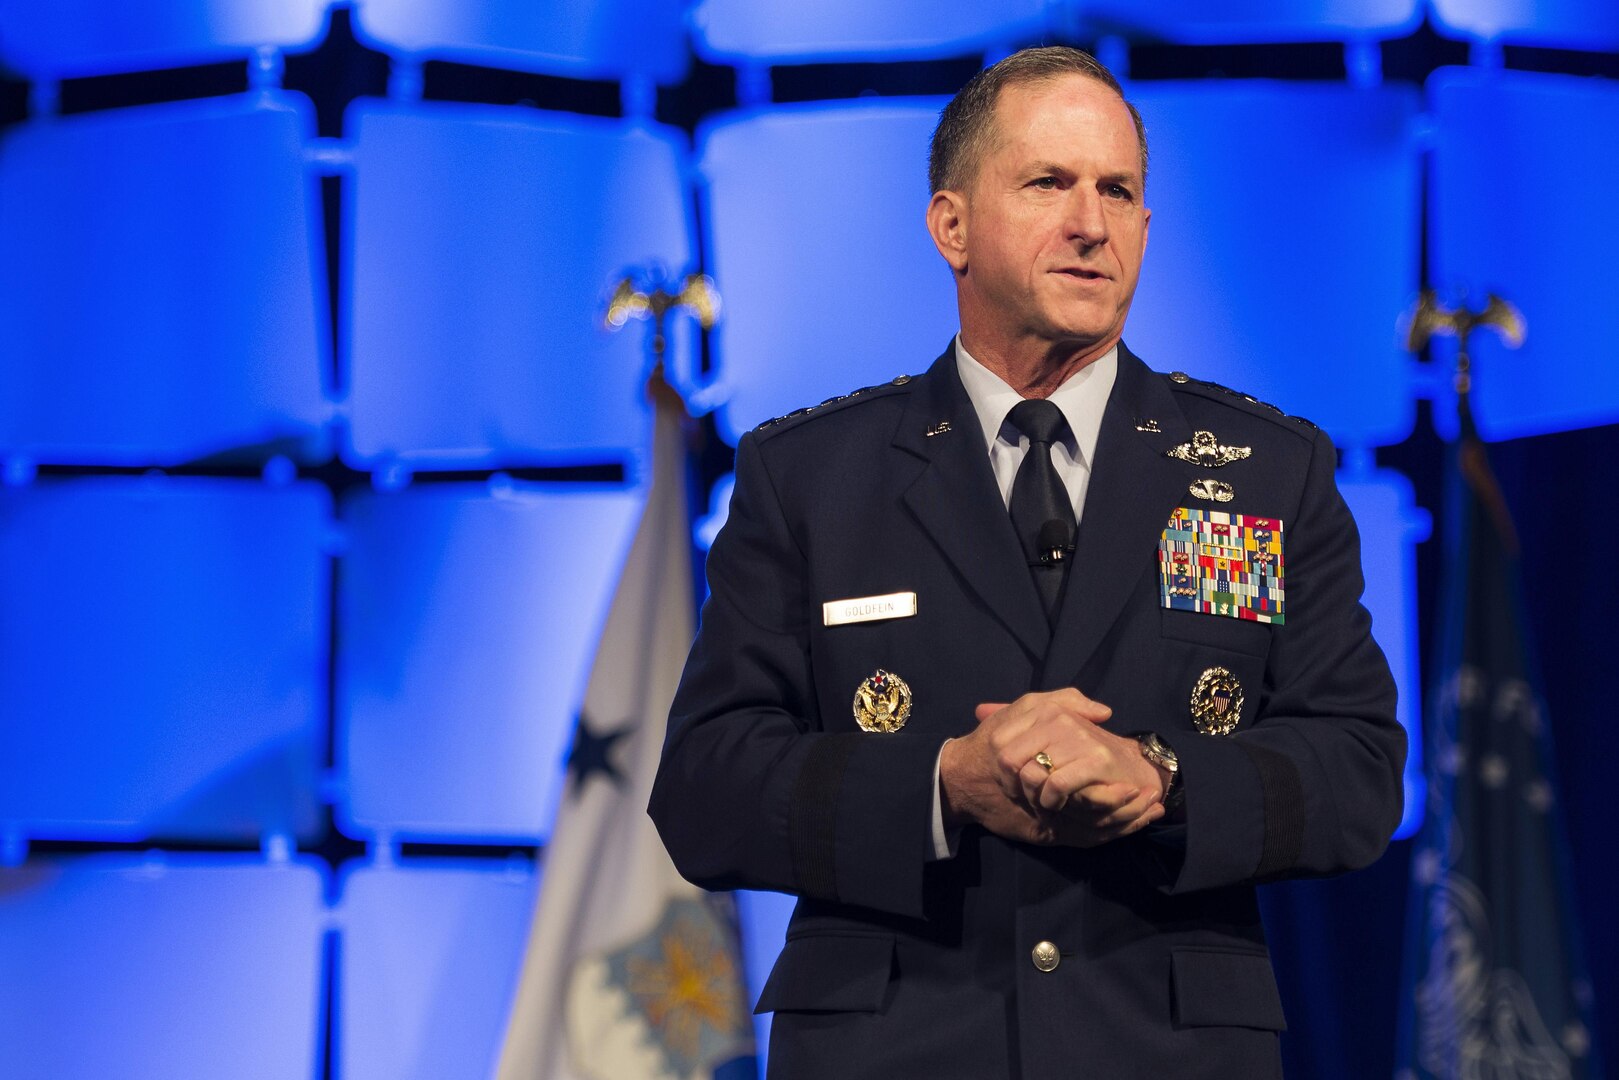 U.S. Air Force Chief of Staff Gen. David L. Goldfein delivers a speech during the Air Force Sergeants Association Professional Airmen’s Conference and International Convention at the Grand Hyatt in San Antonio Aug. 24, 2016. Goldfein, the keynote speaker, focused his remarks on the state of the Air Force. 